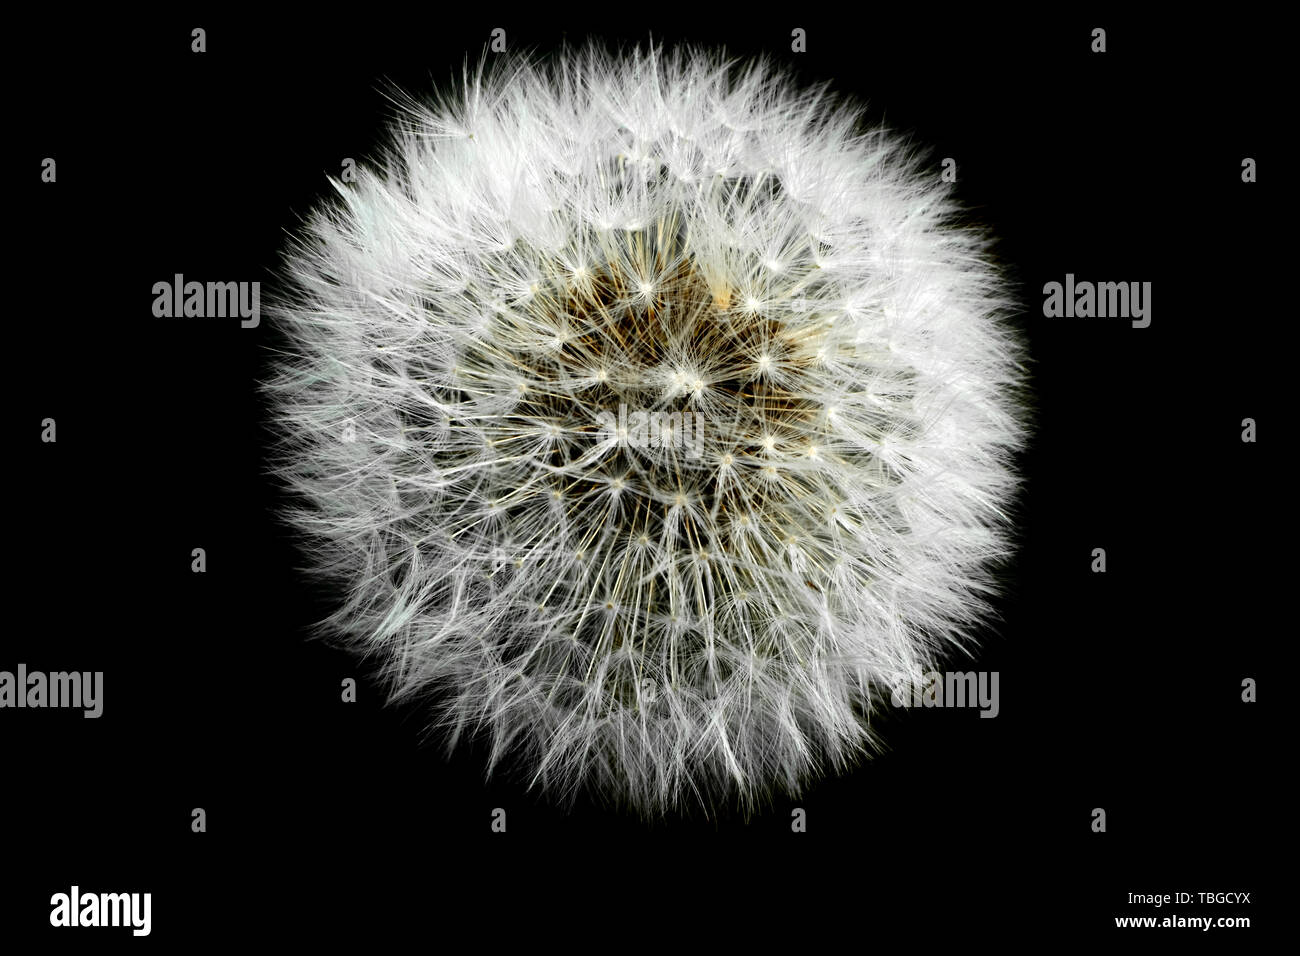 A dandelion with seeds isolated against a black background. Stock Photo